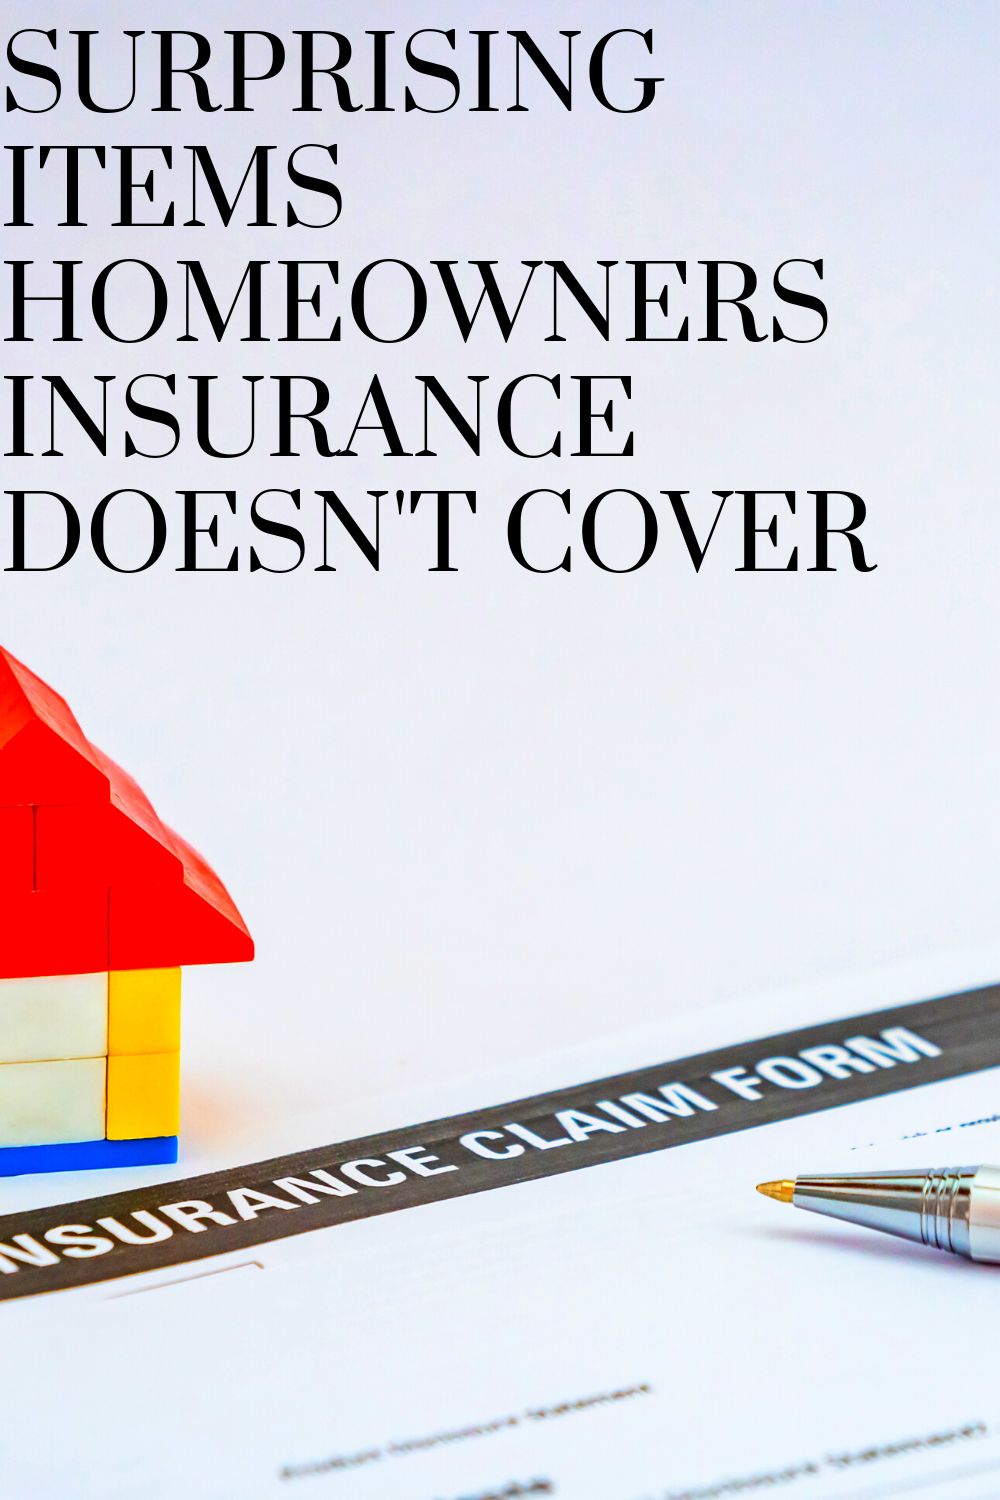 Surprising Items Homeowners Insurance Doesn't Cover